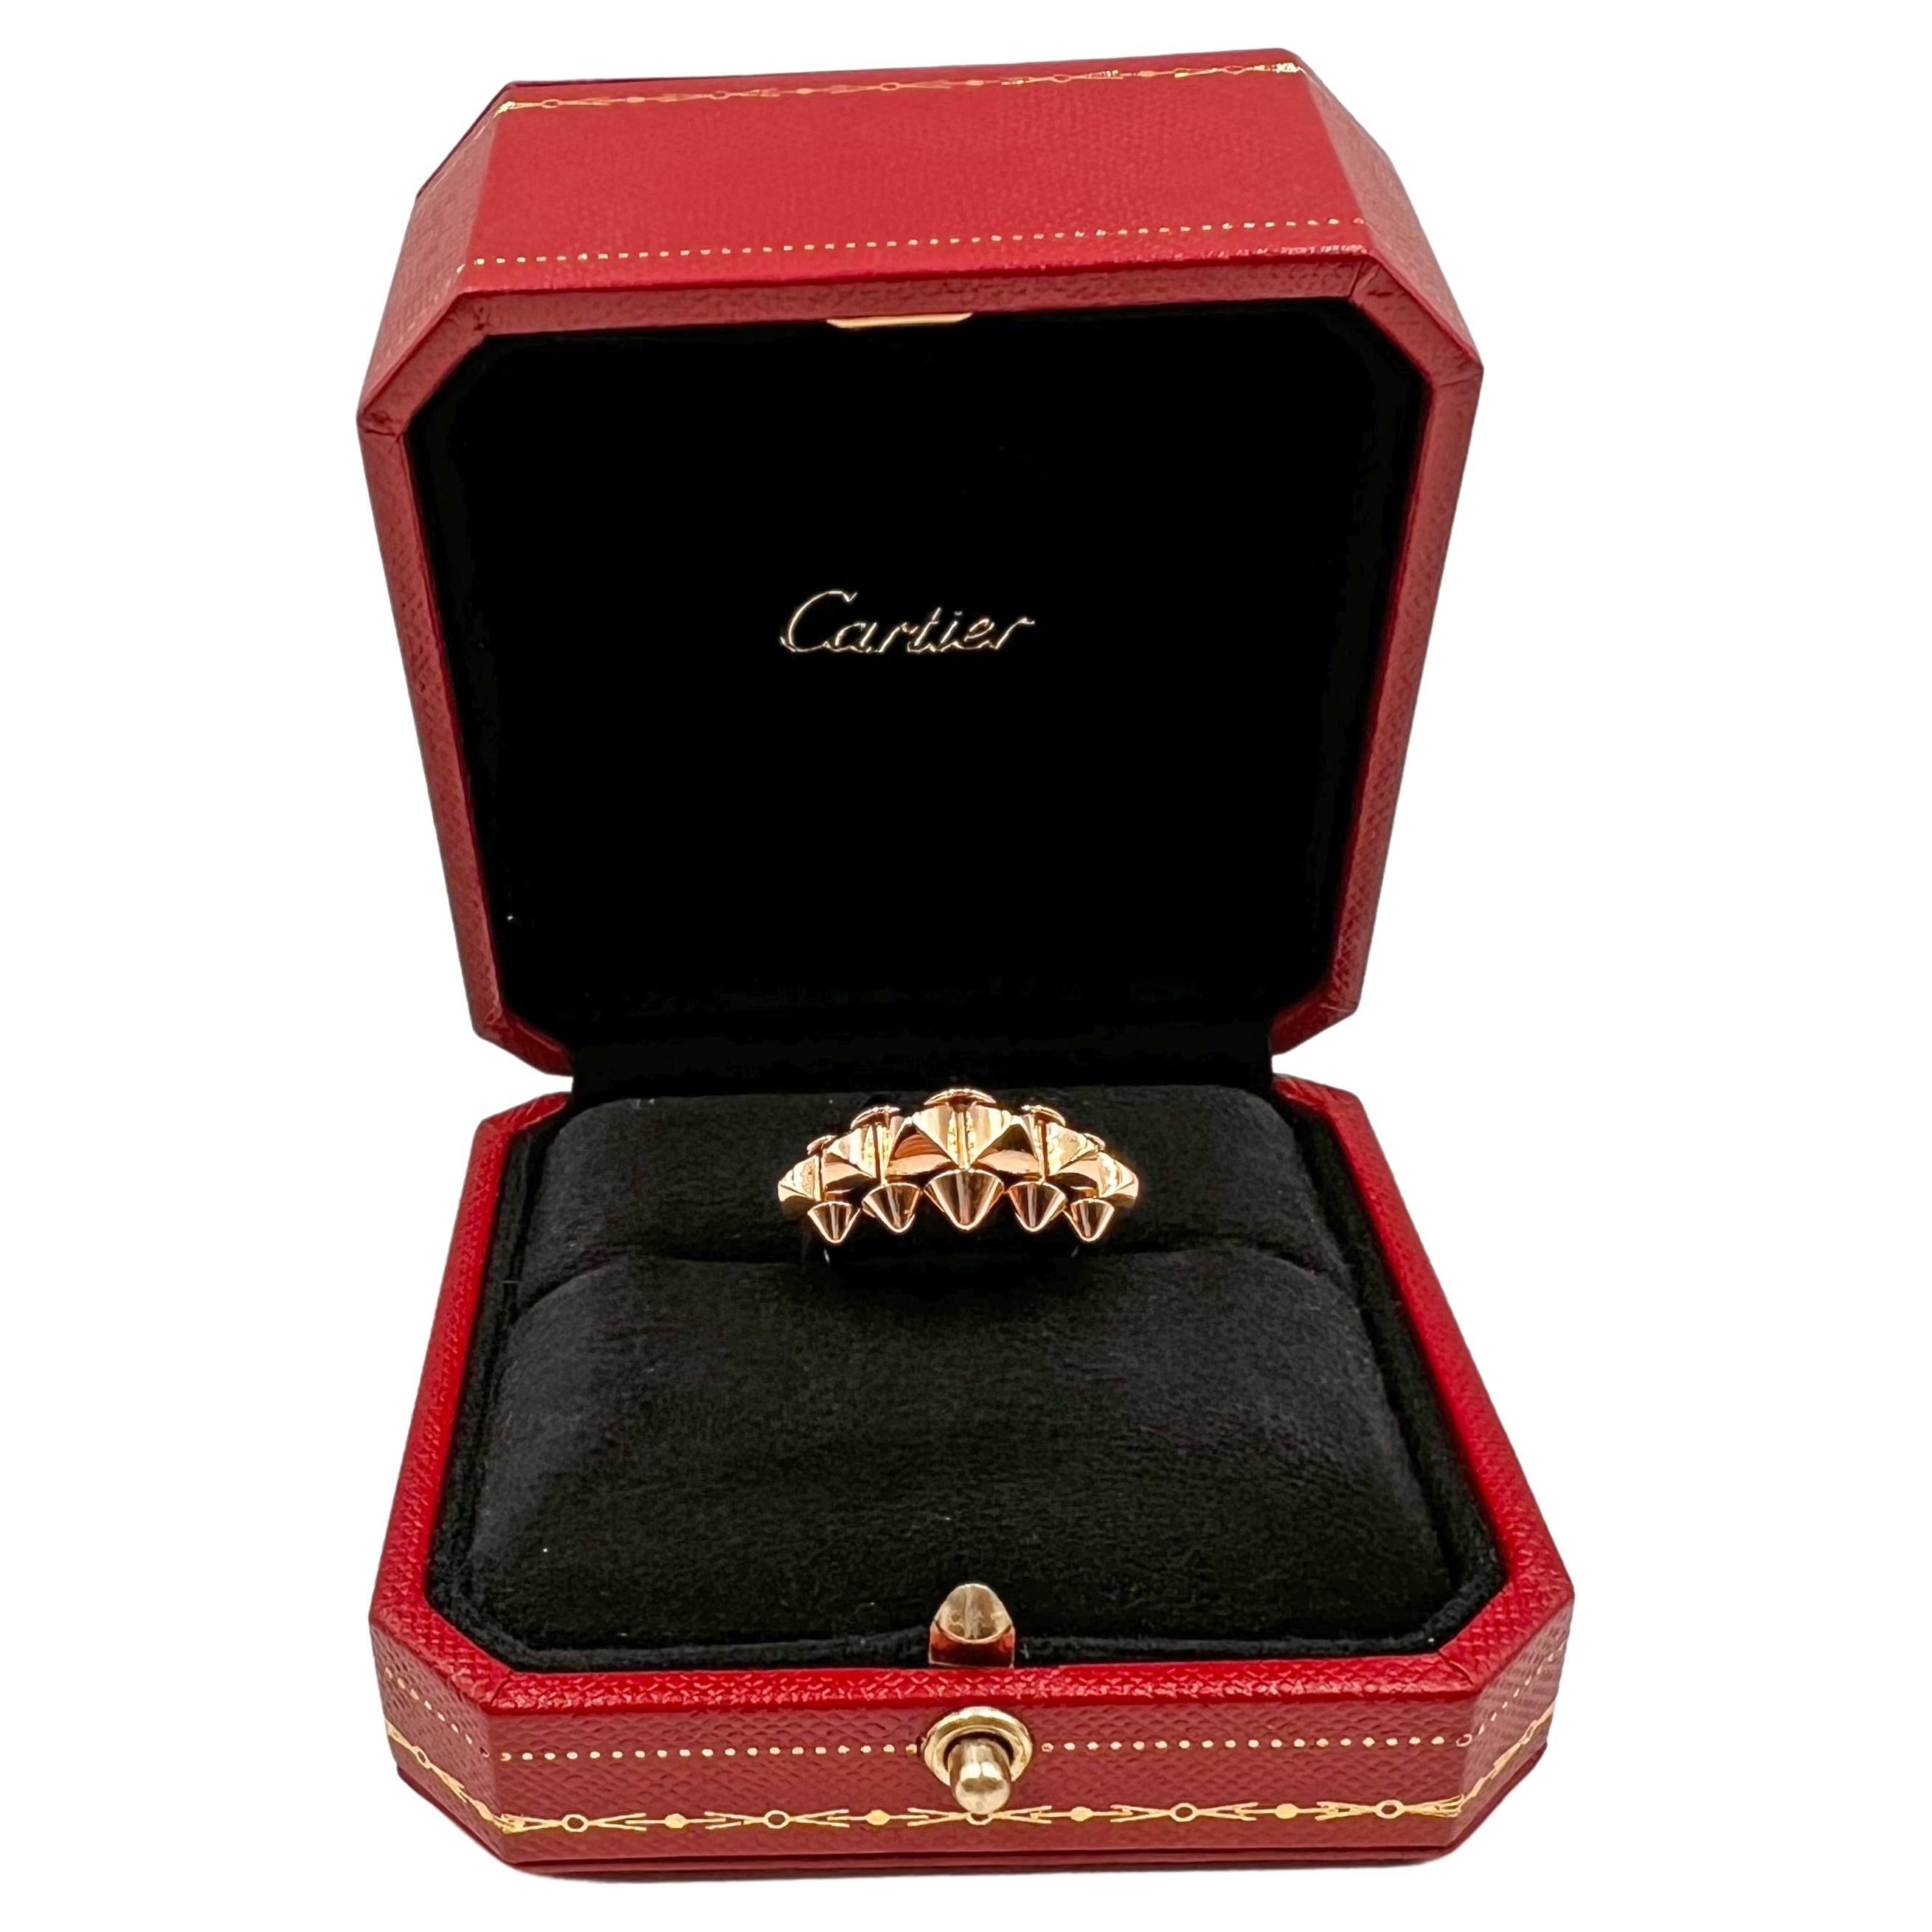 This 18k rose gold medium-sized version of the de Clash de Cartier ring includes the signature row of clou carré studs halfway down the band and a solid polished shank at the bottom. The central row has six larger pyramidal graduated studs bordered